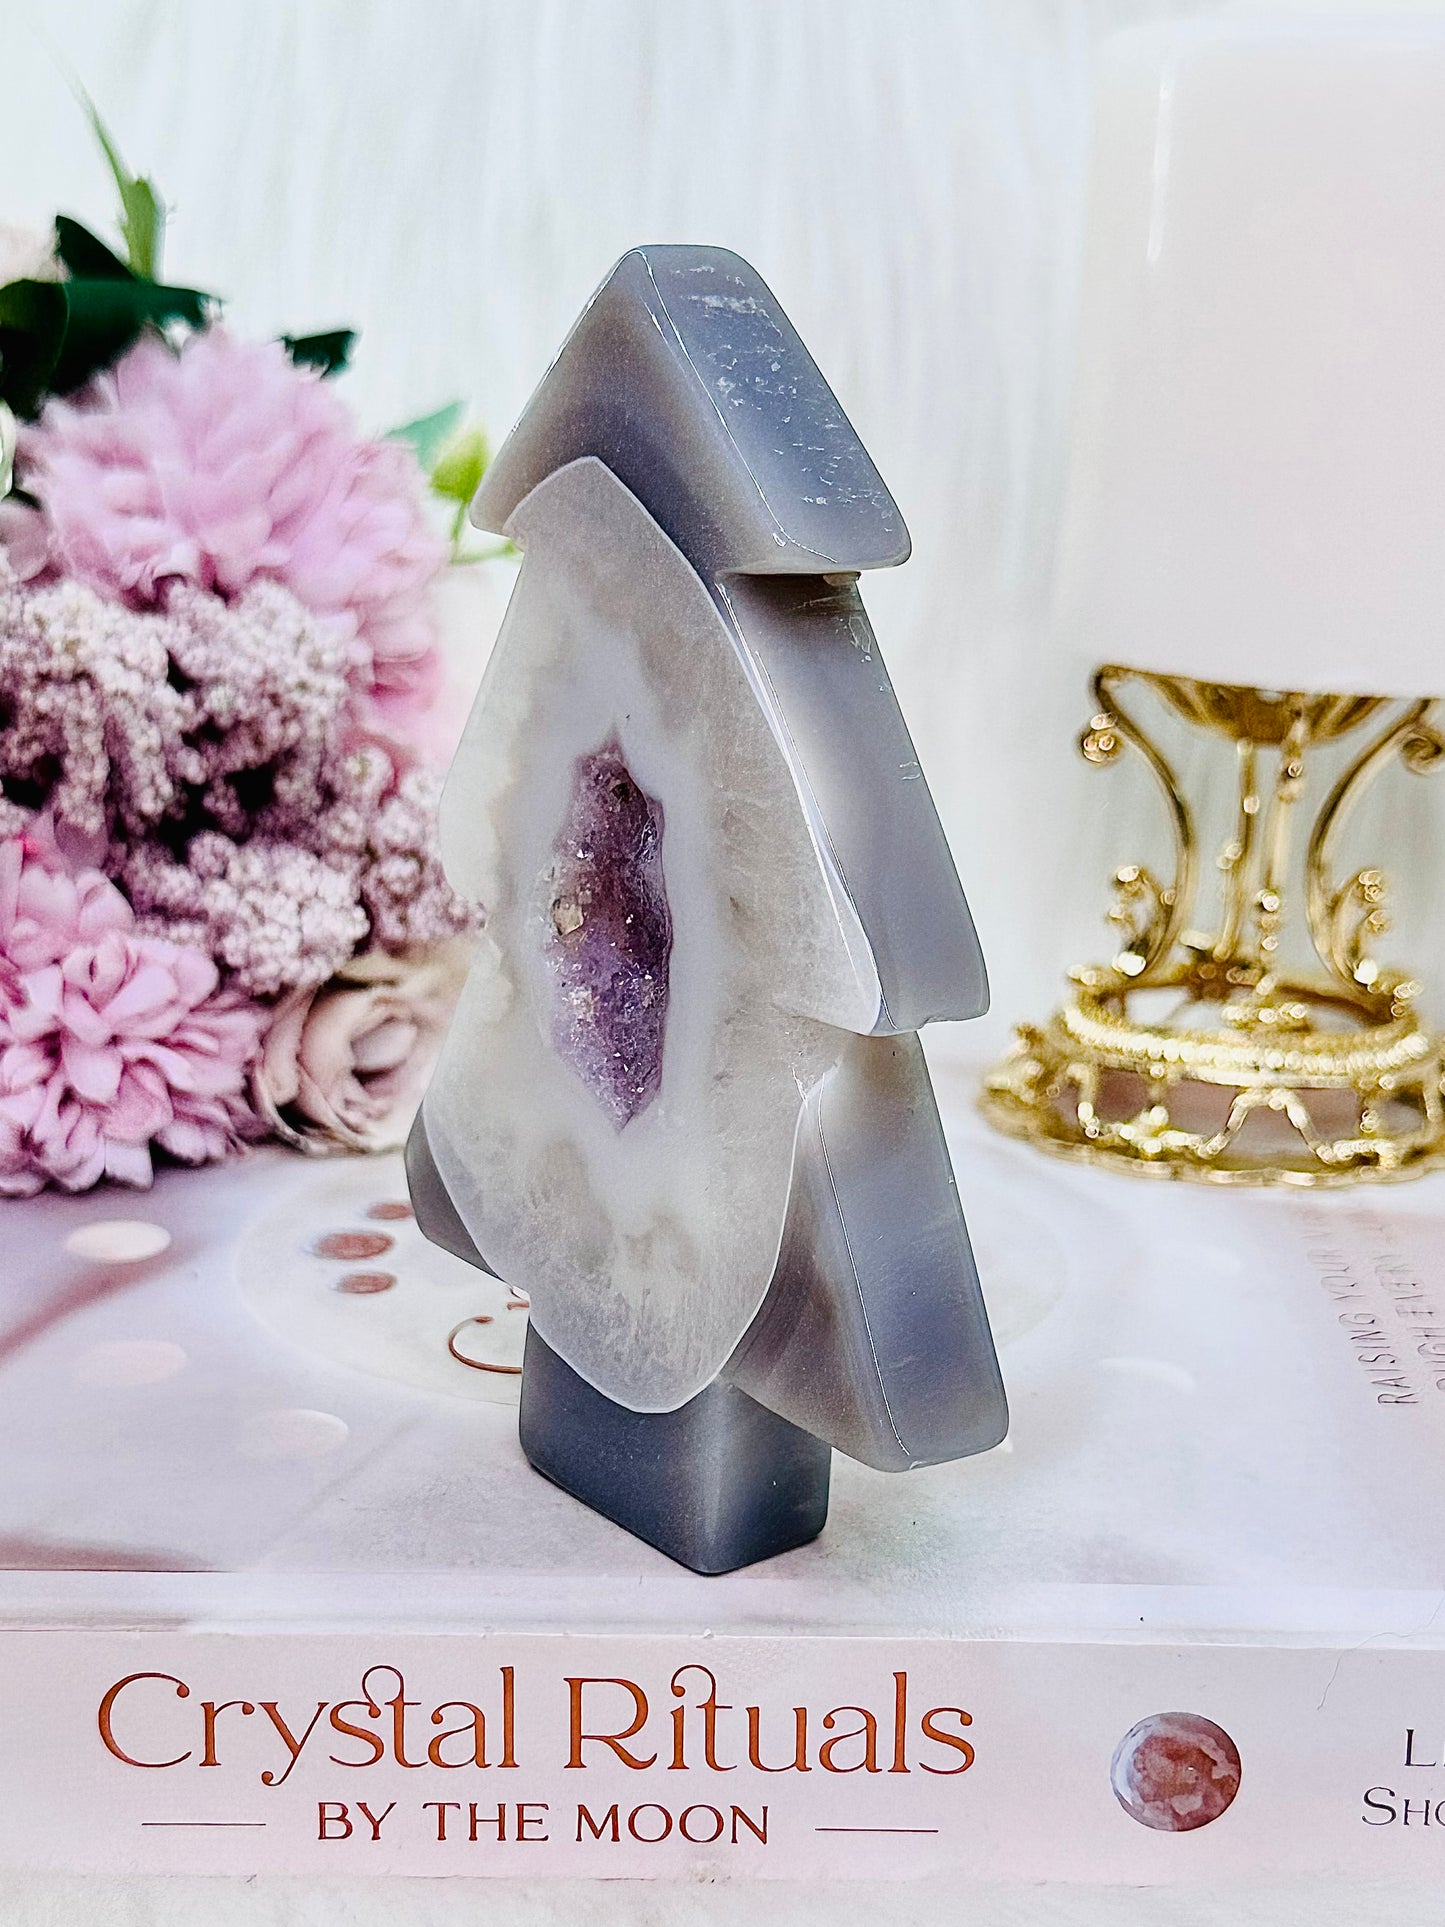 For The Most Wonderful Time Of Year ~ Stunning Druzy Agate Amethyst Carved Christmas Tree From Brazil 12cm